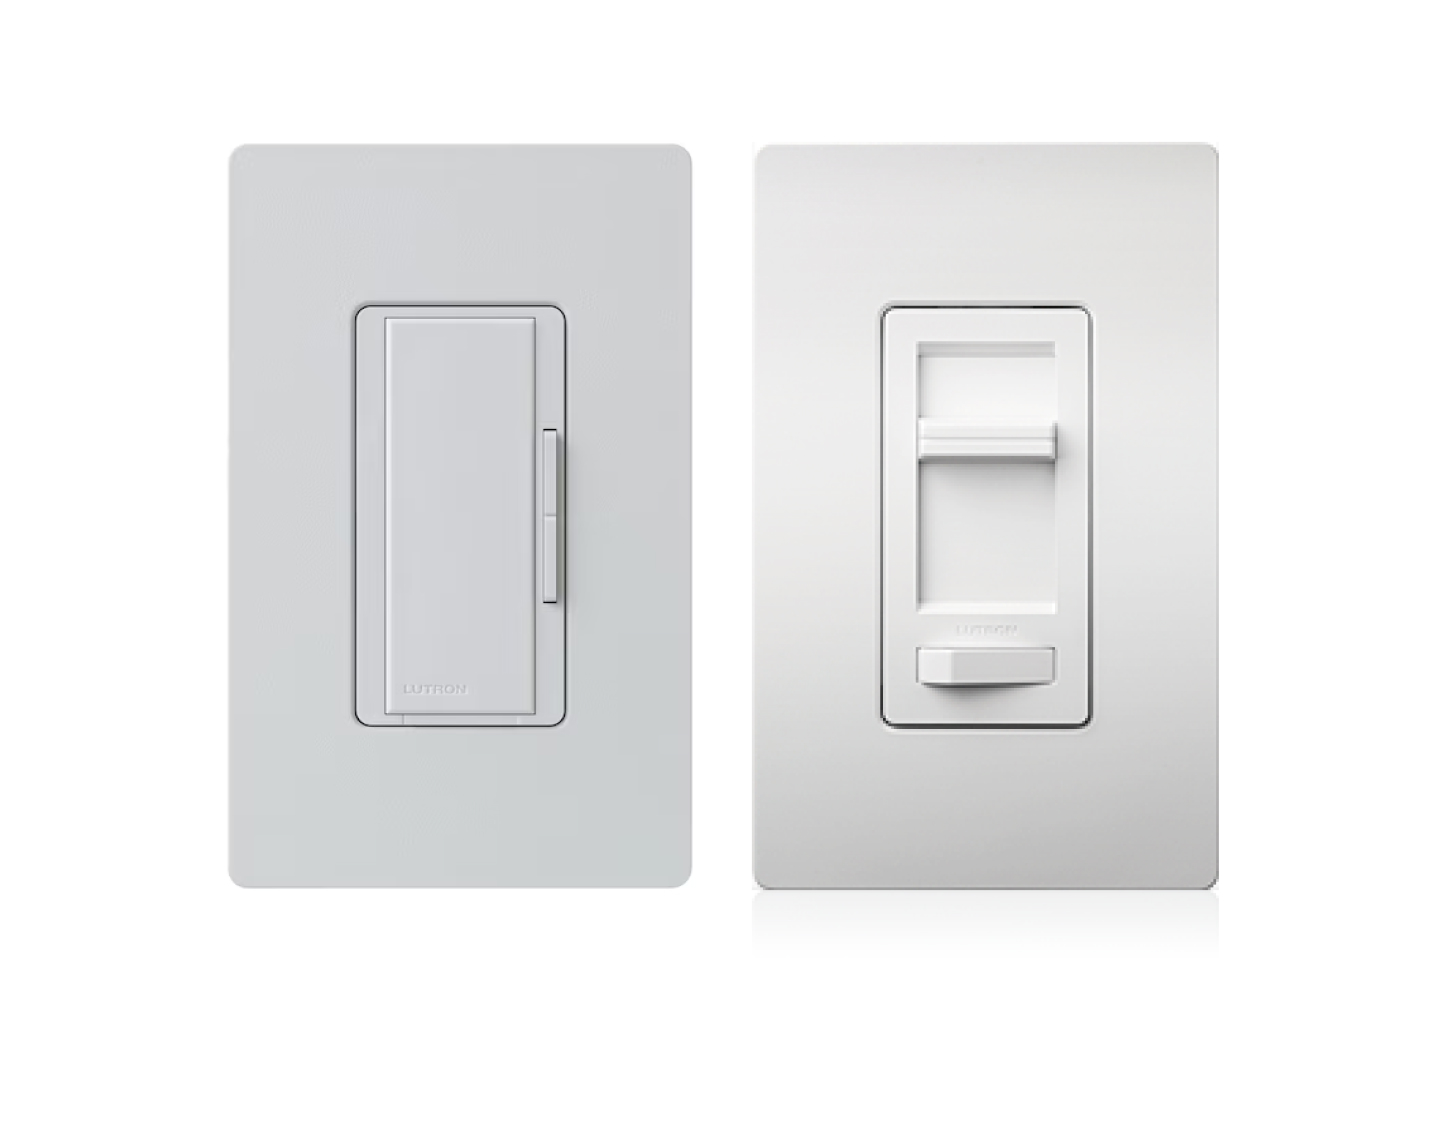 Lutron light dimmer and light switch fan control